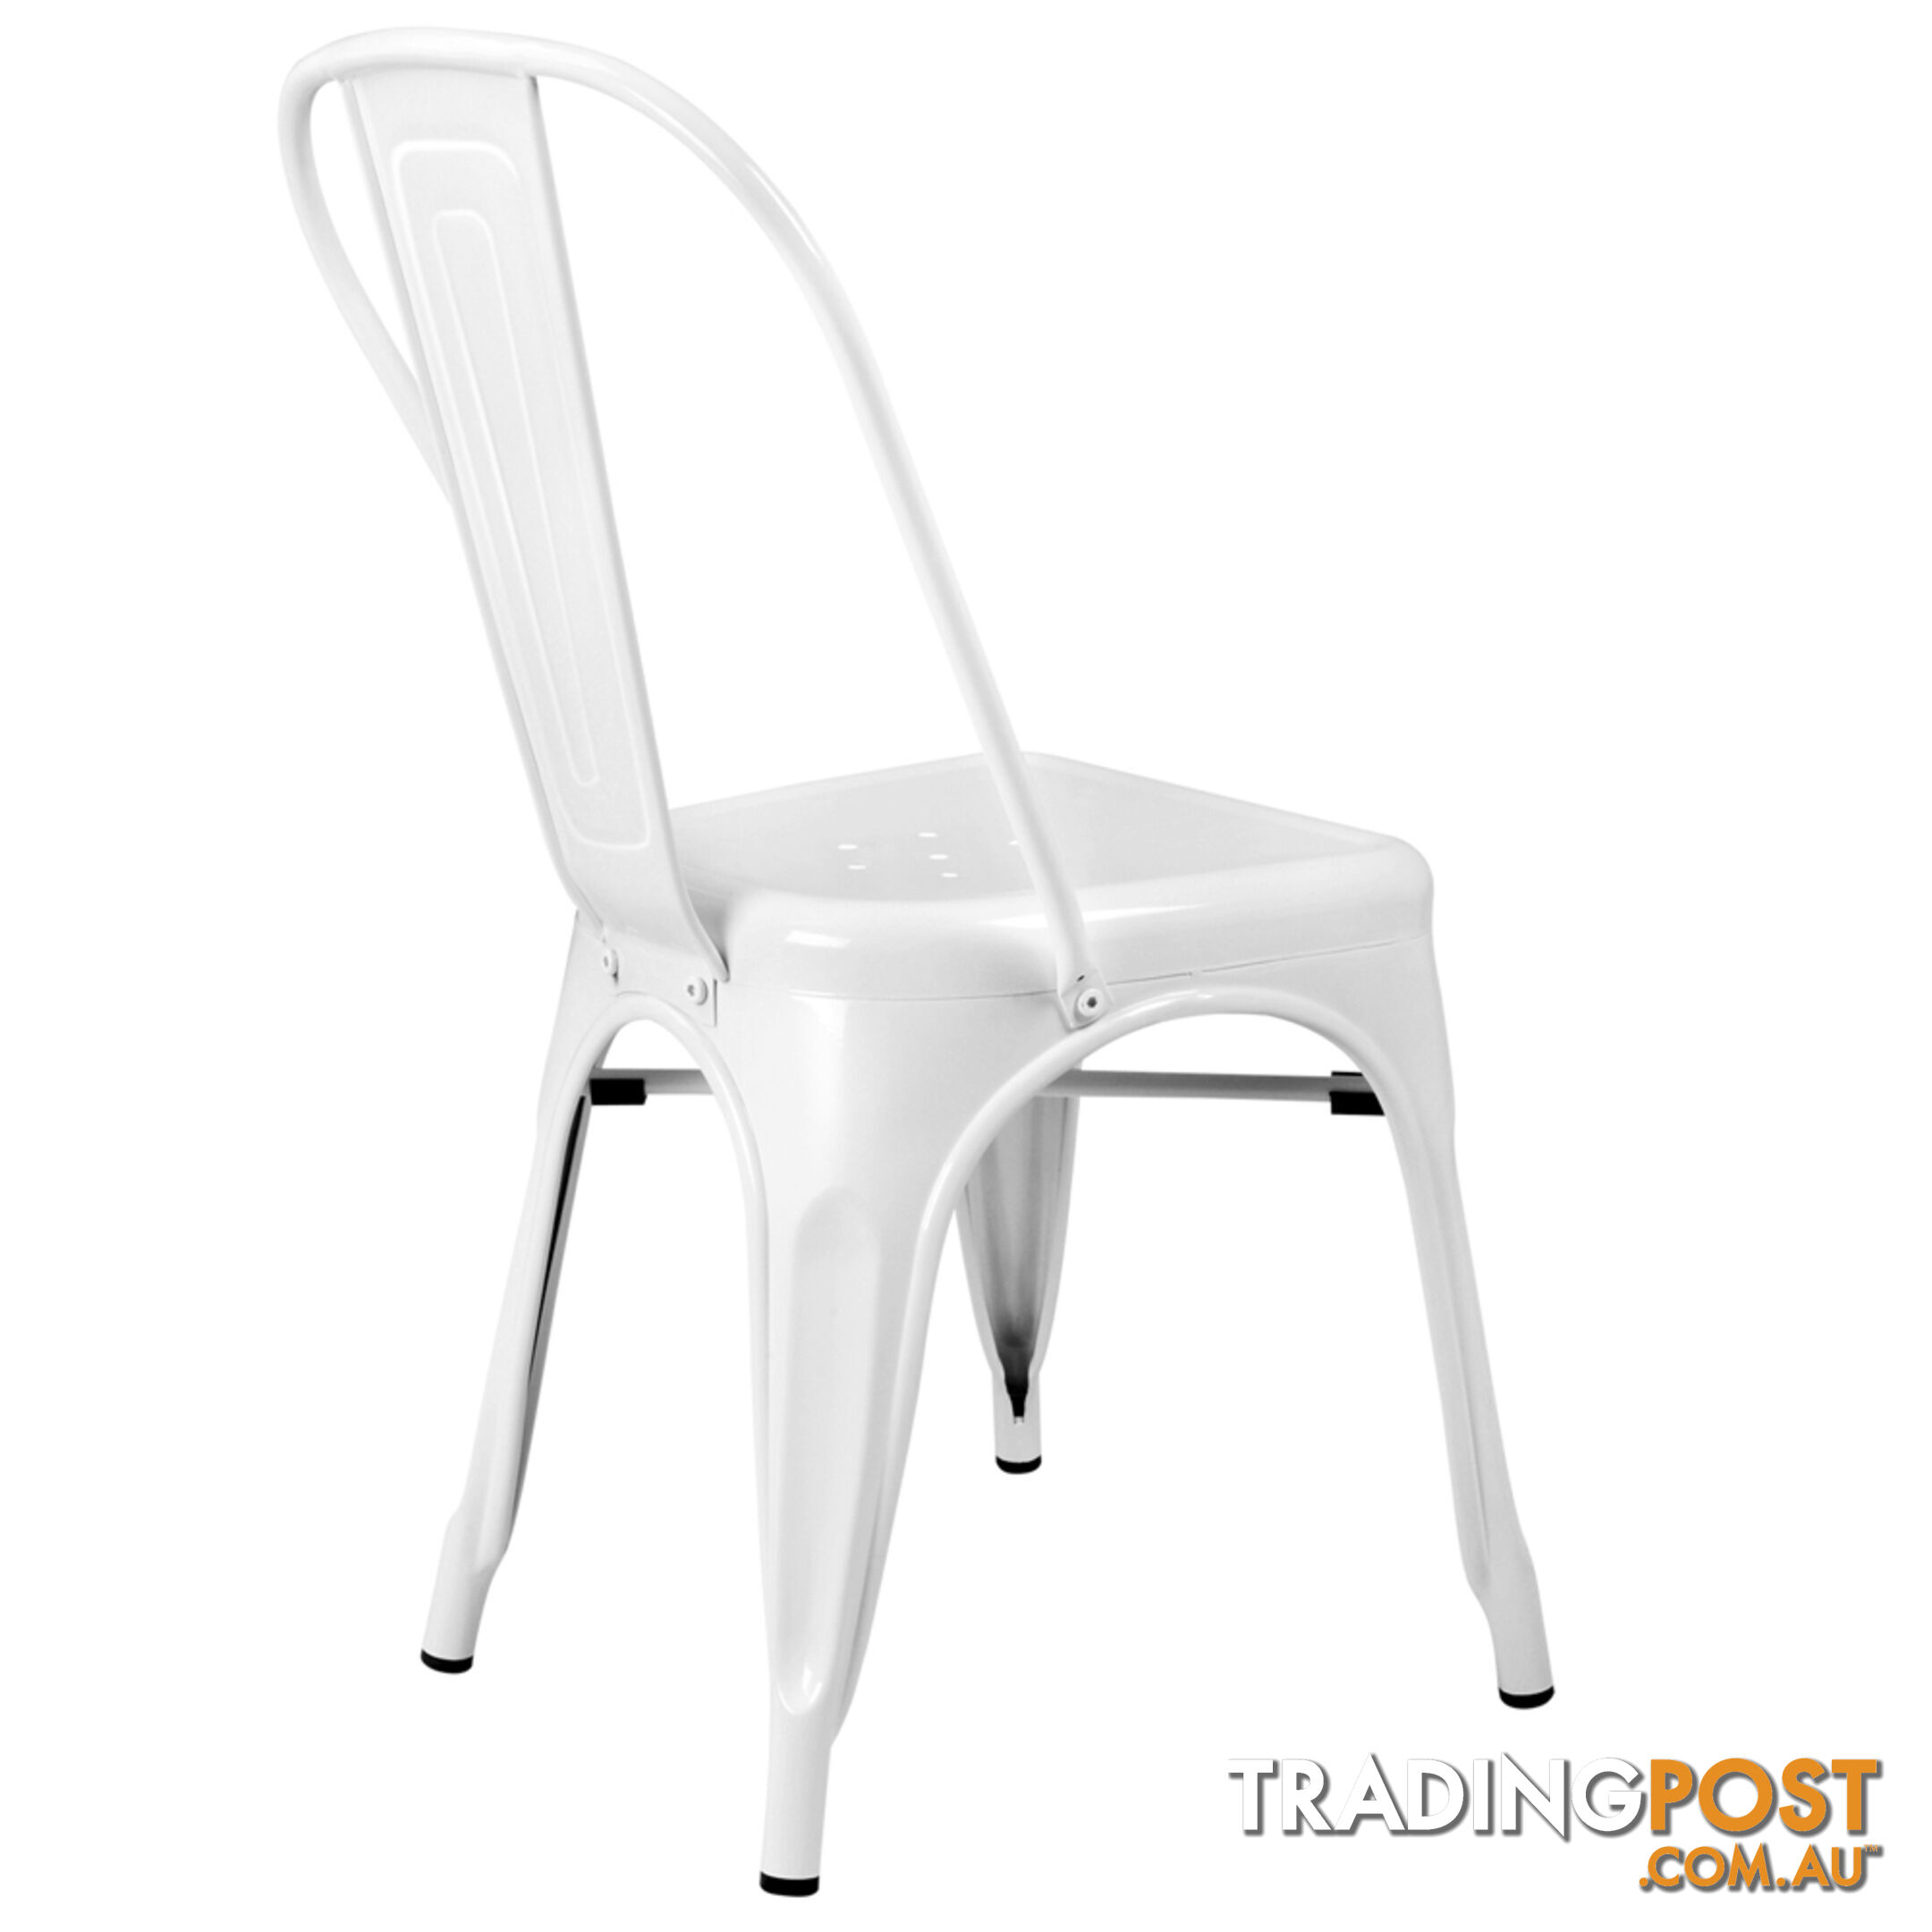 Set of 4 Replica Tolix Dining Metal Chair Gloss White